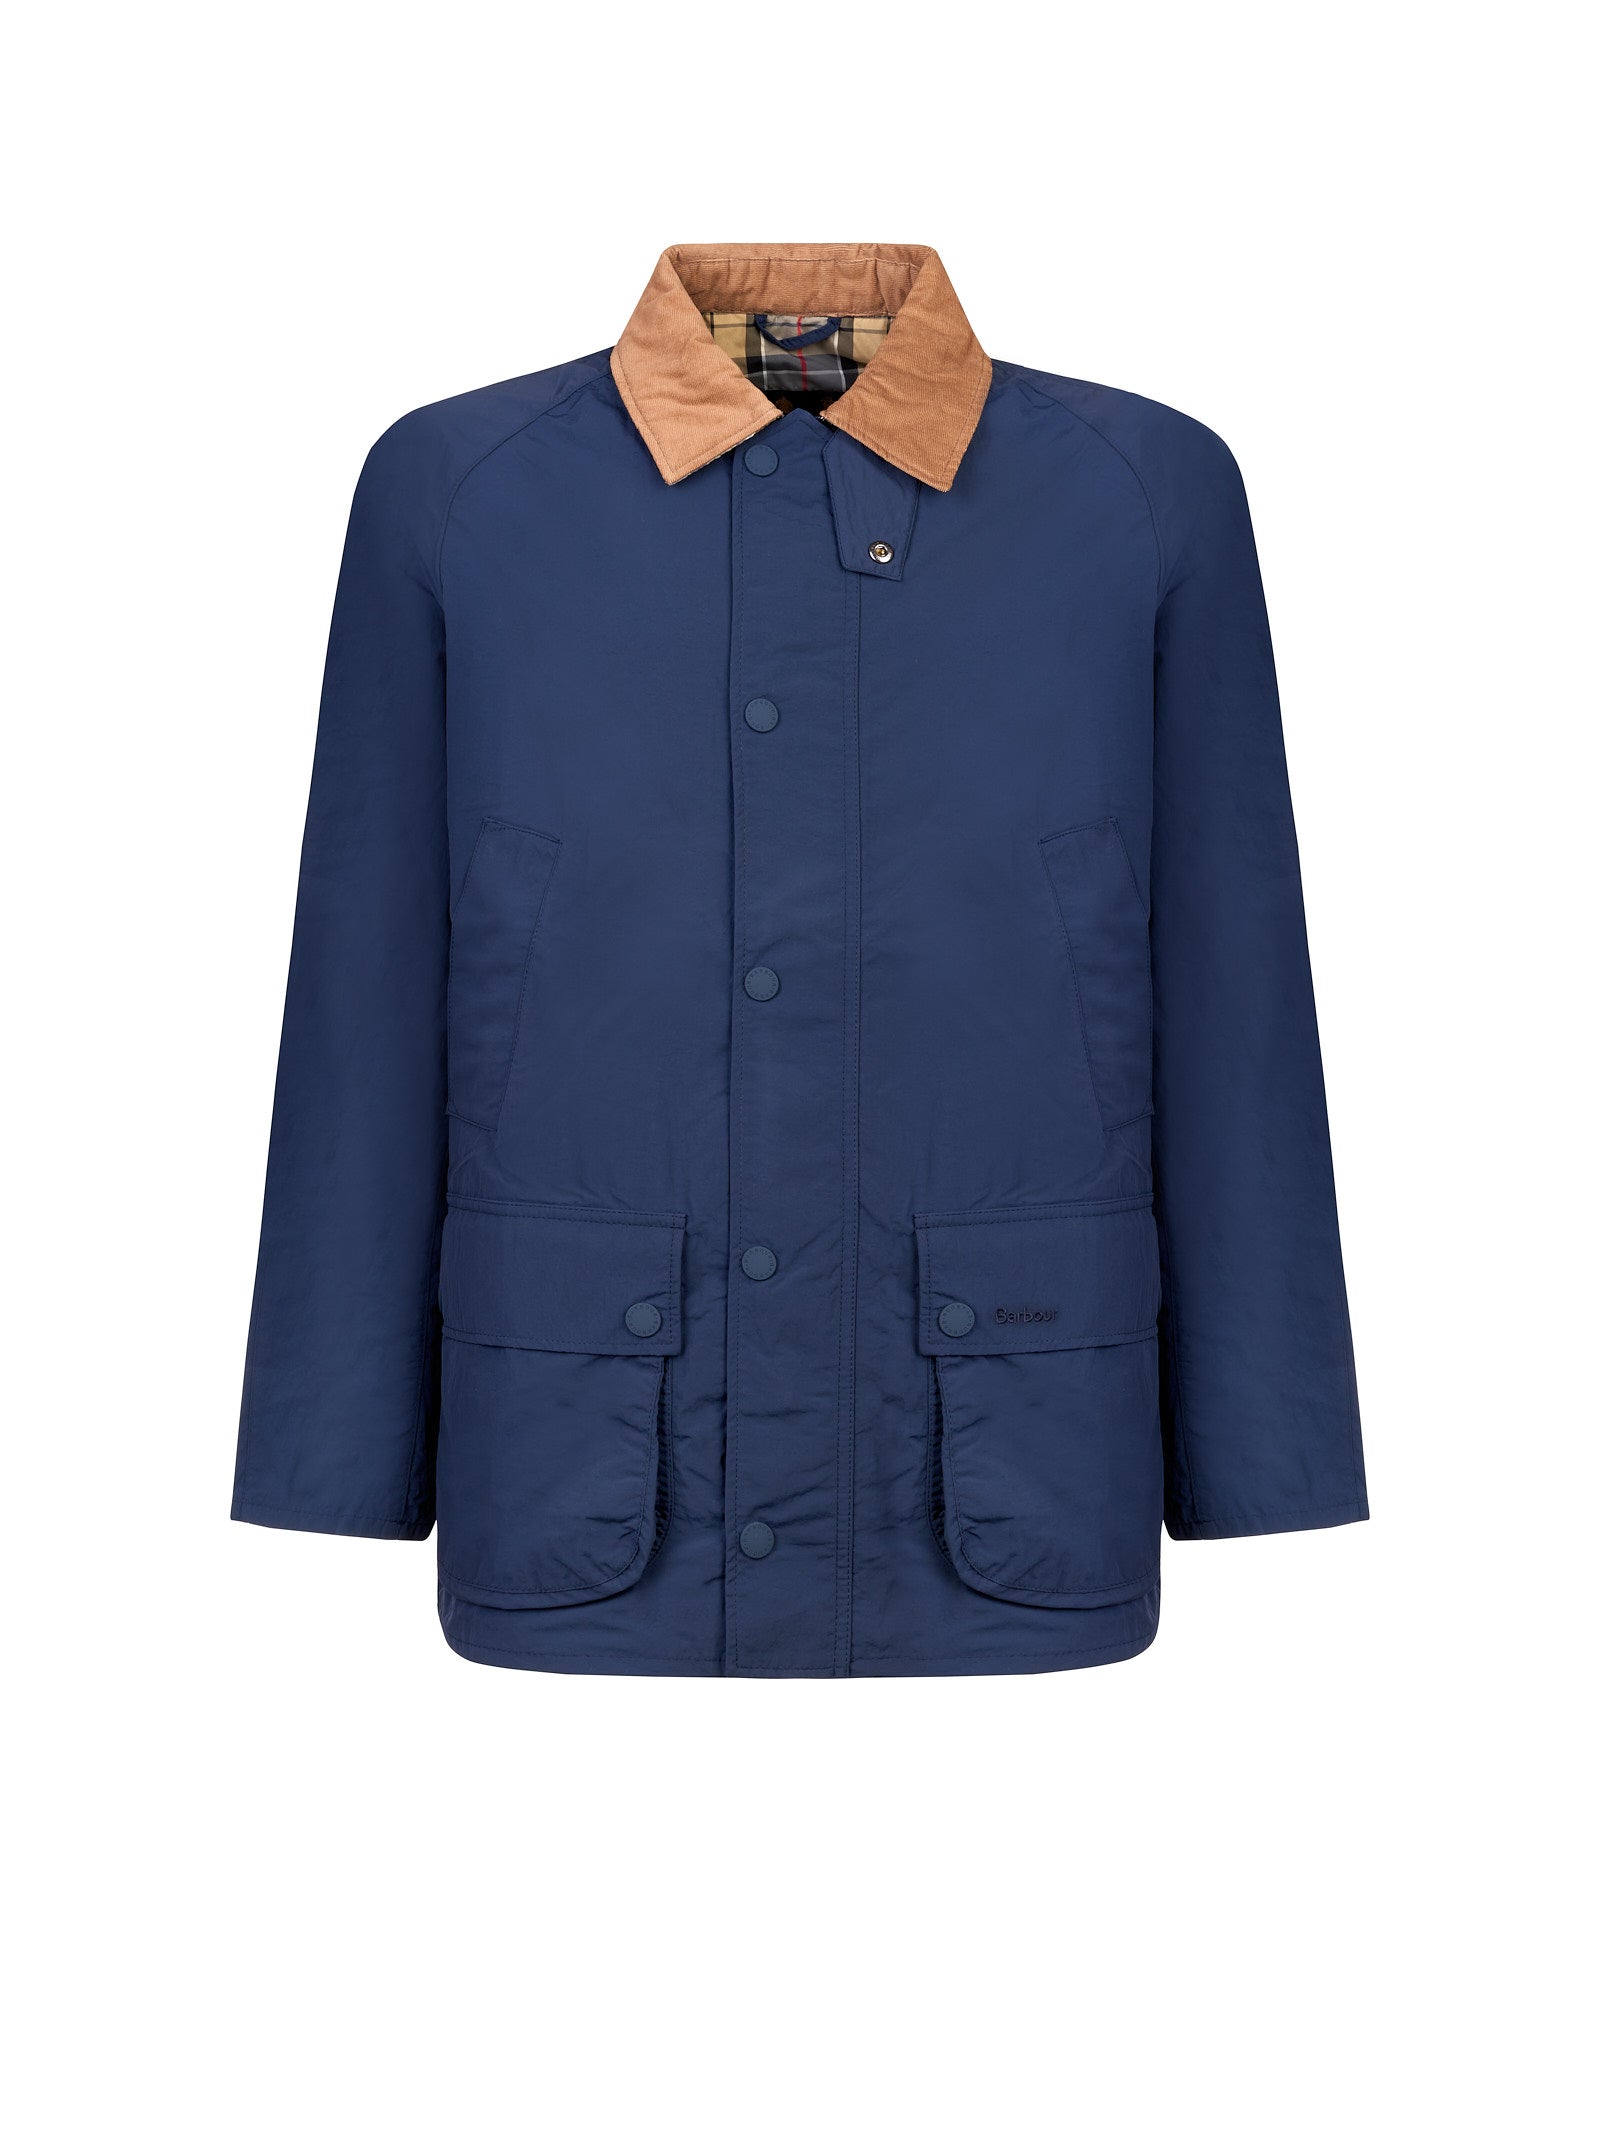 Giubbotto BARBOUR Ashby
Navy